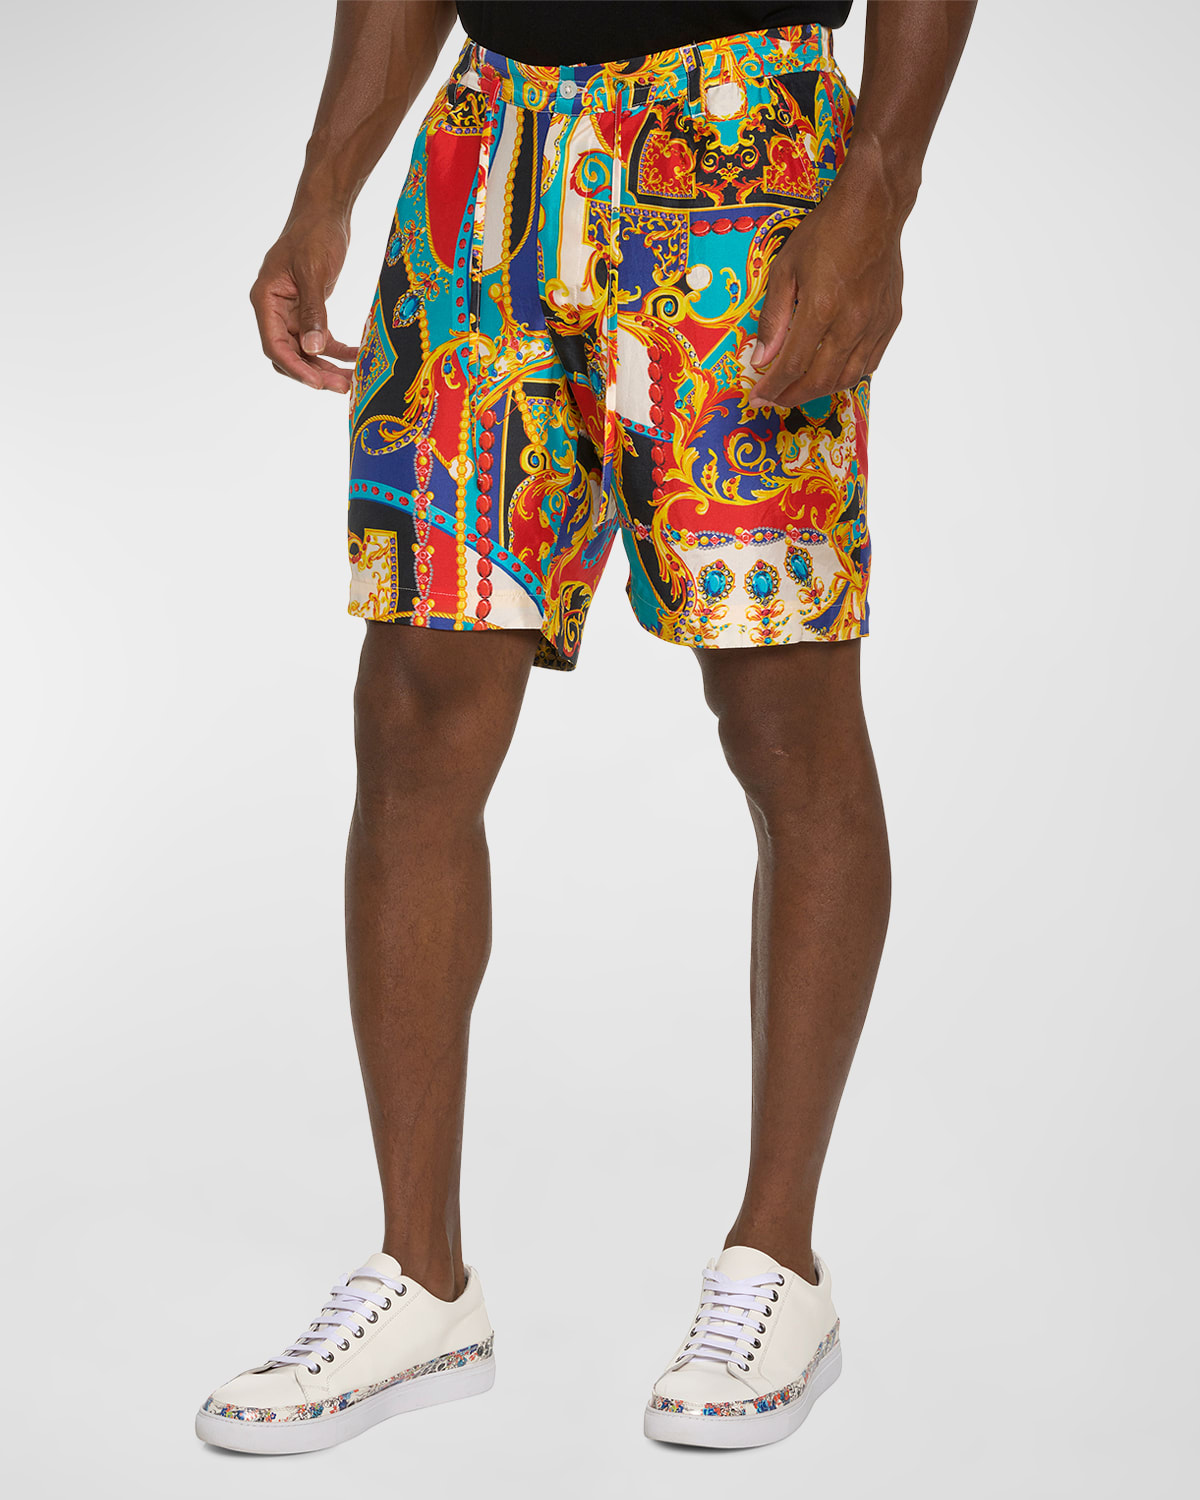 Men's More More More Printed Woven Shorts